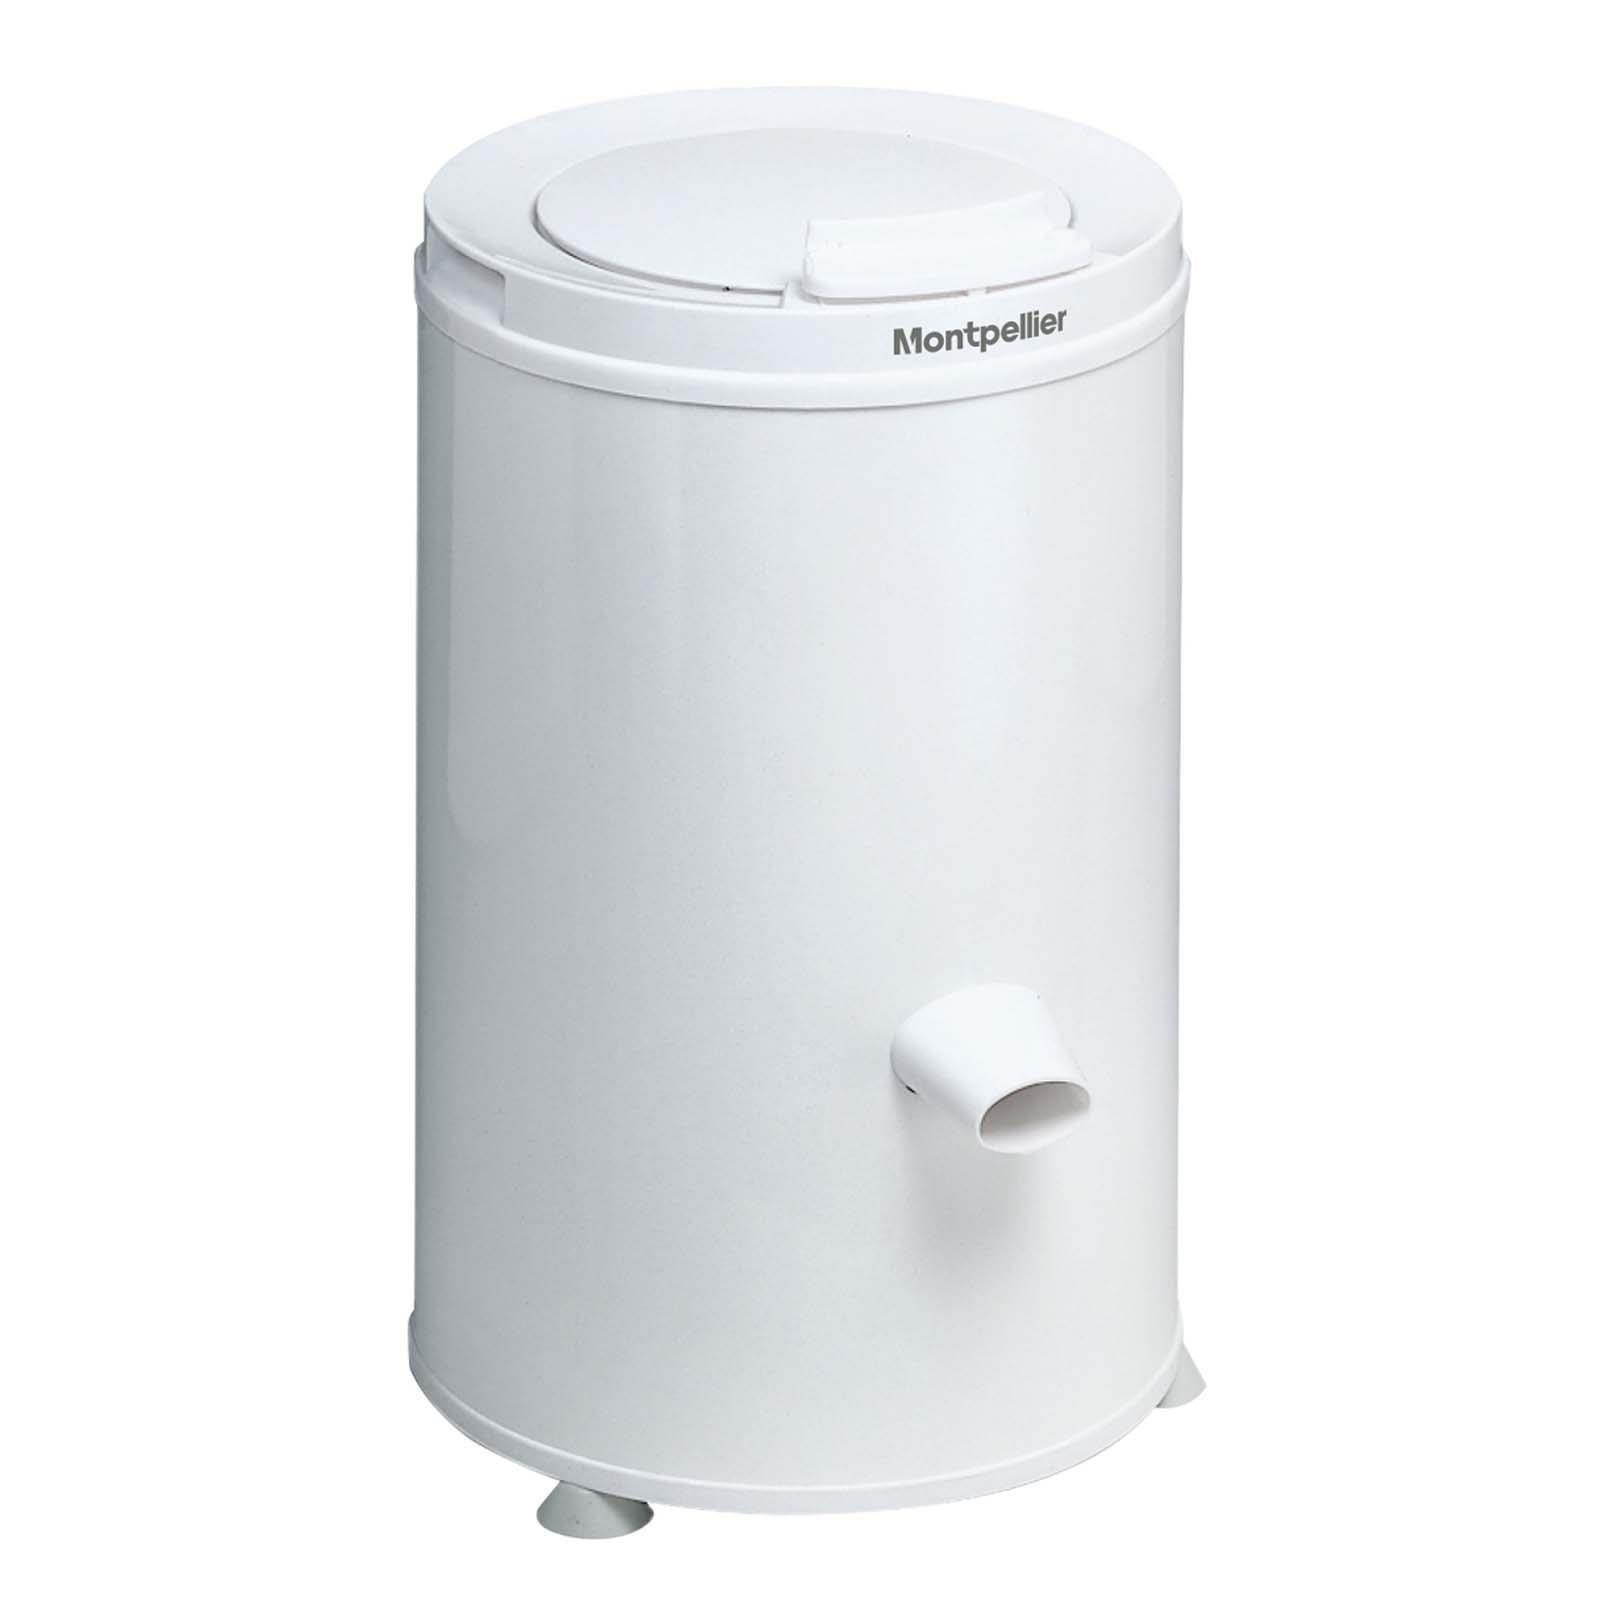 3kg Gravity Spin Dryer 2800rpm In White MSD2800W